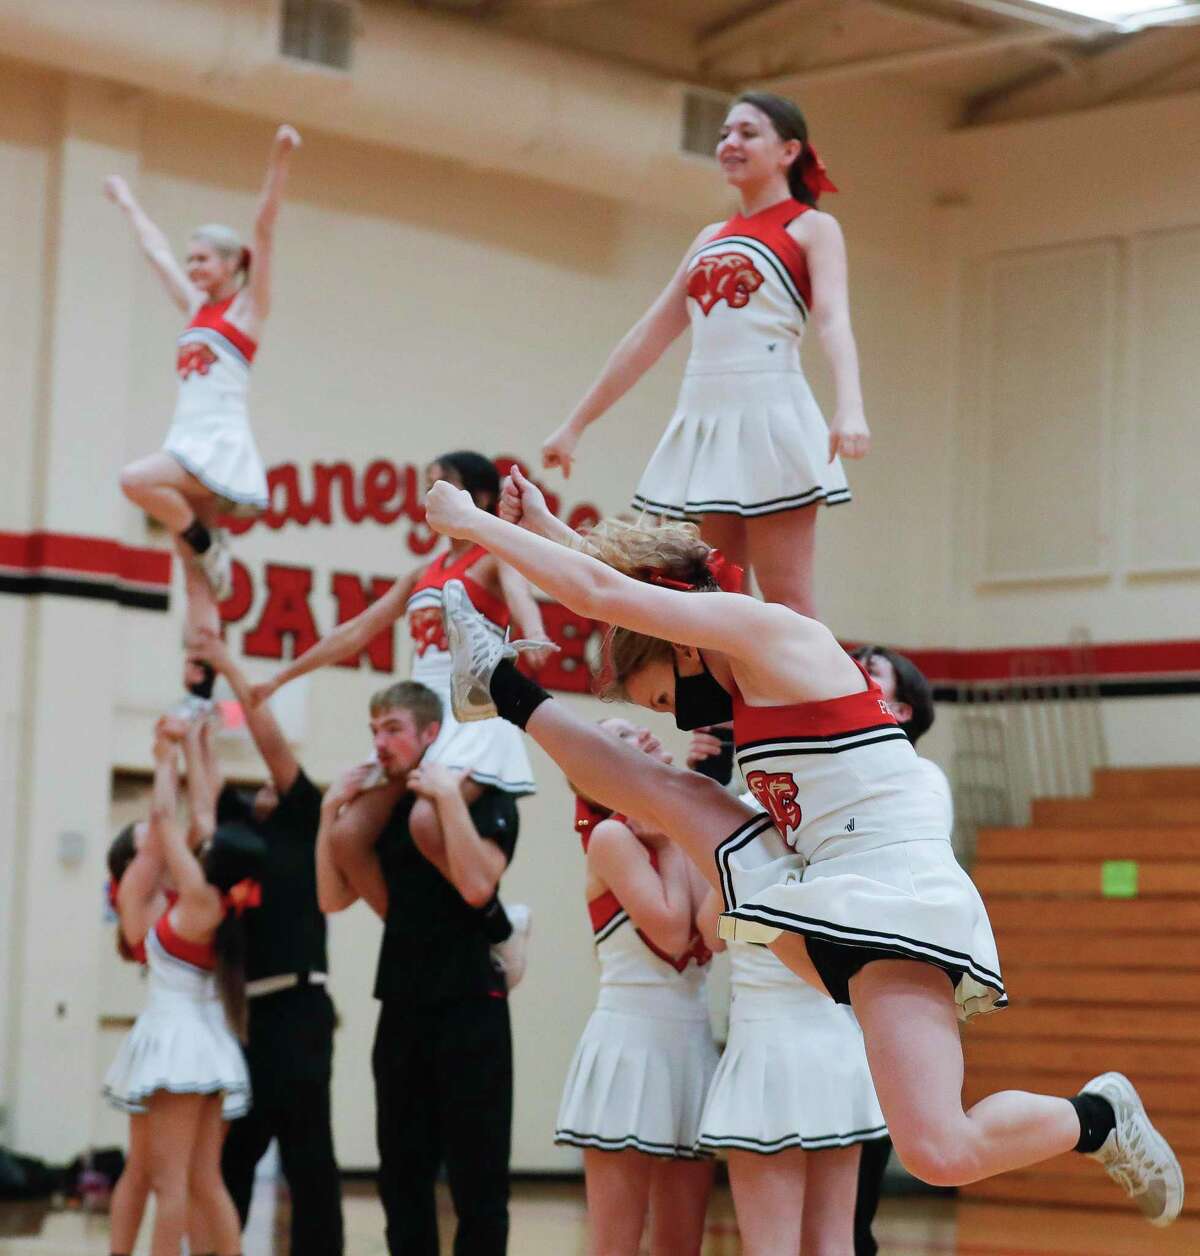 Caney Creek High School cheerleader Bailey LaCaze a performs a front hurdler as she takes part in a contest routine with teammates, Thursday, Jan. 28, 2021, in Grangerland. The team finished fourth in the Coed division of the UIL State Spirit Championships on Jan. 13 in Fort Worth.